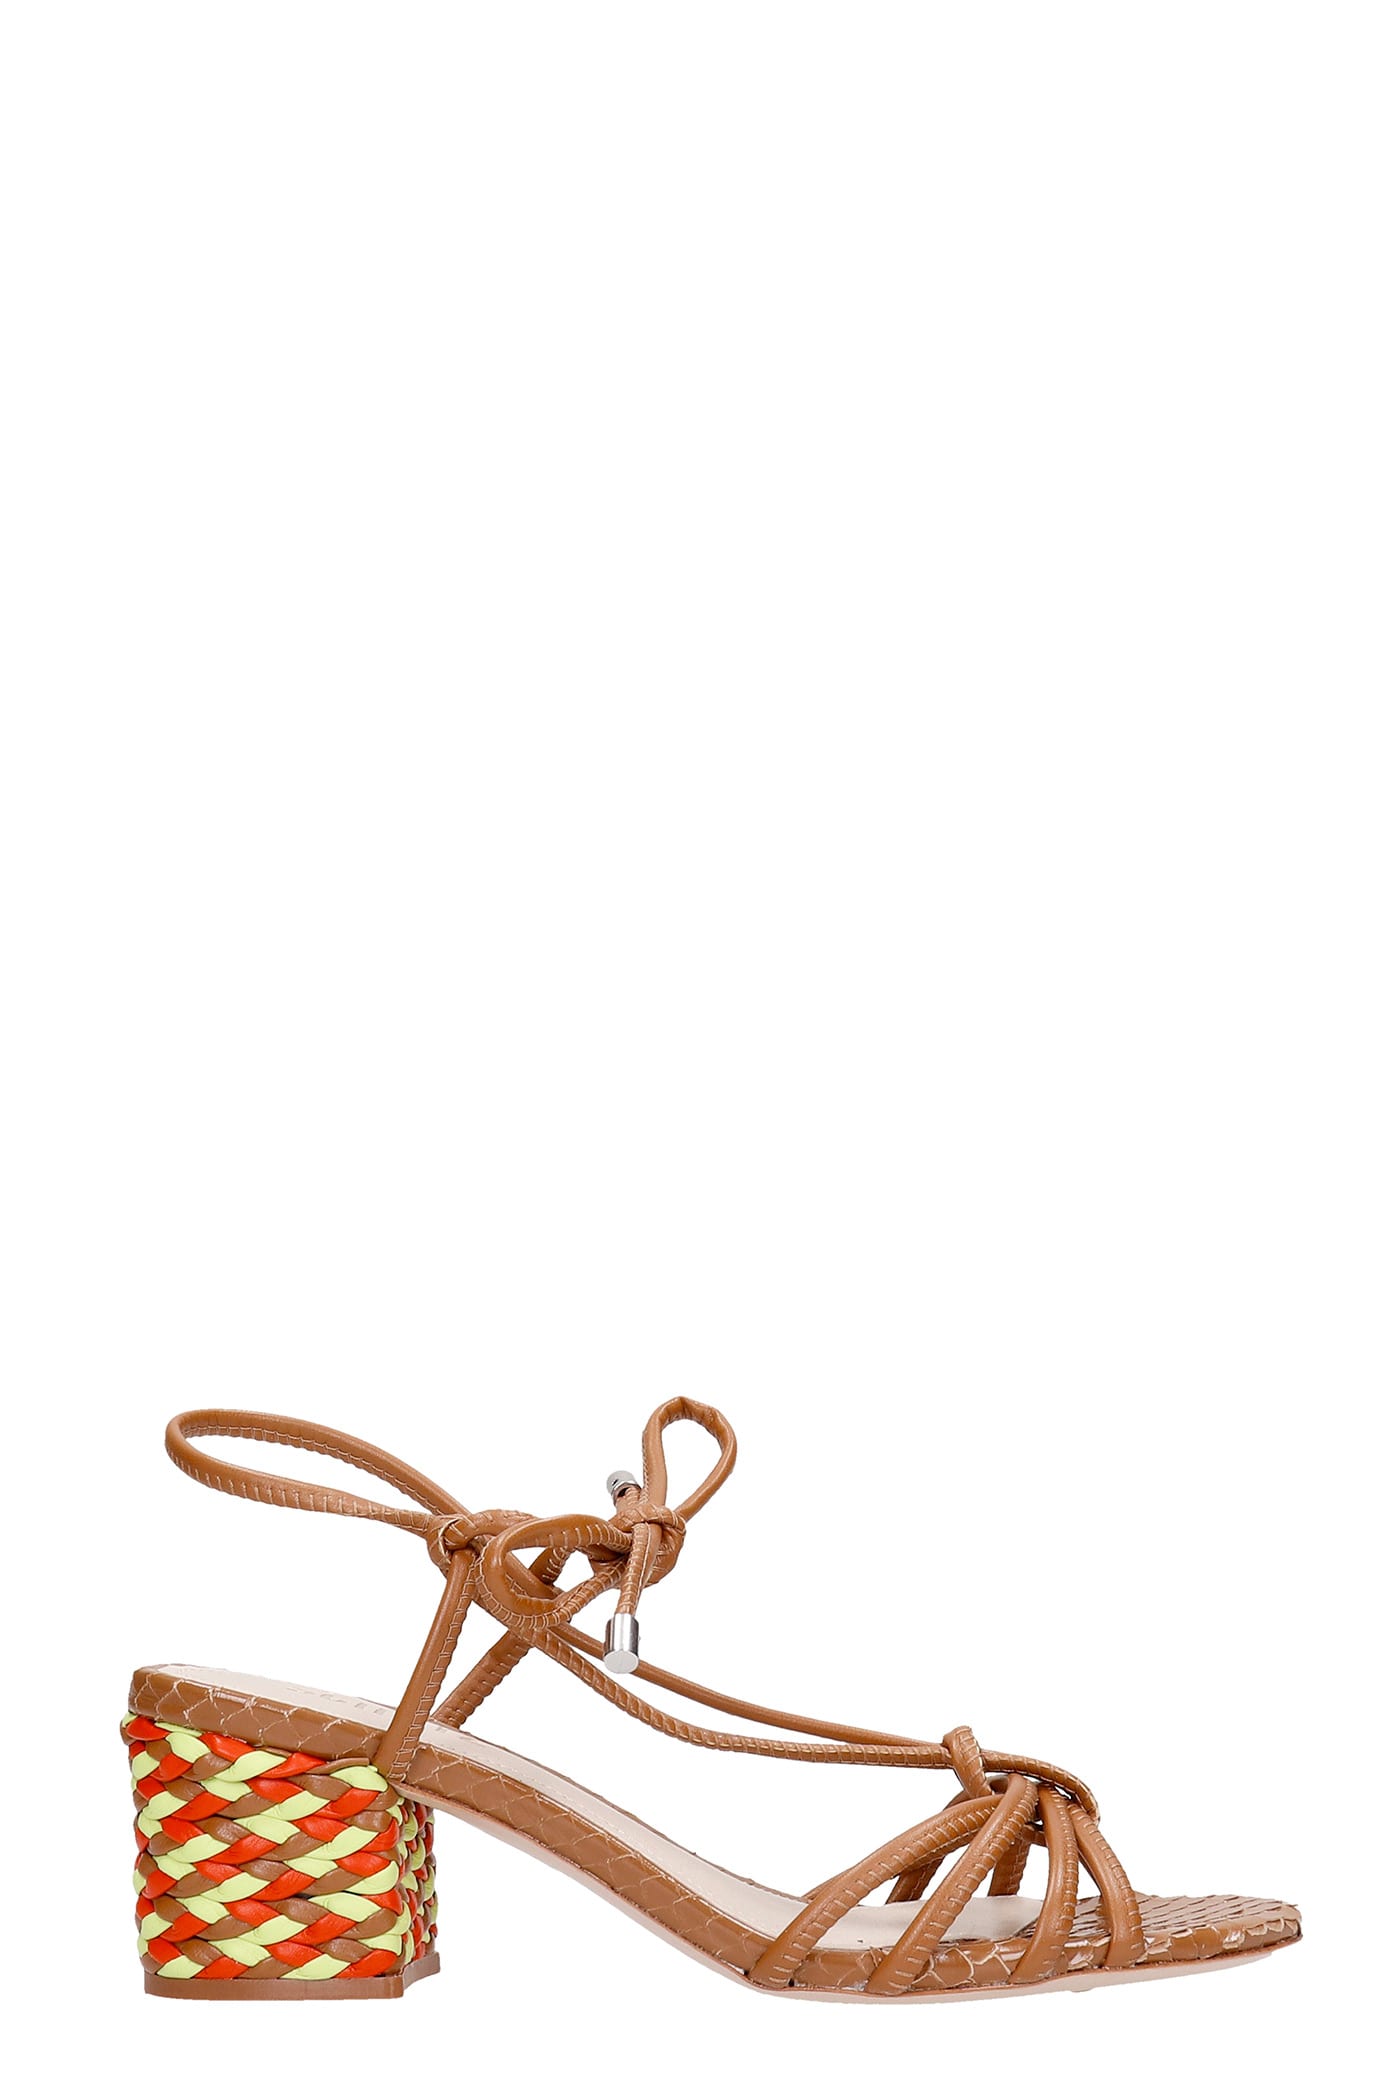 Schutz Sandals In Leather Color Leather